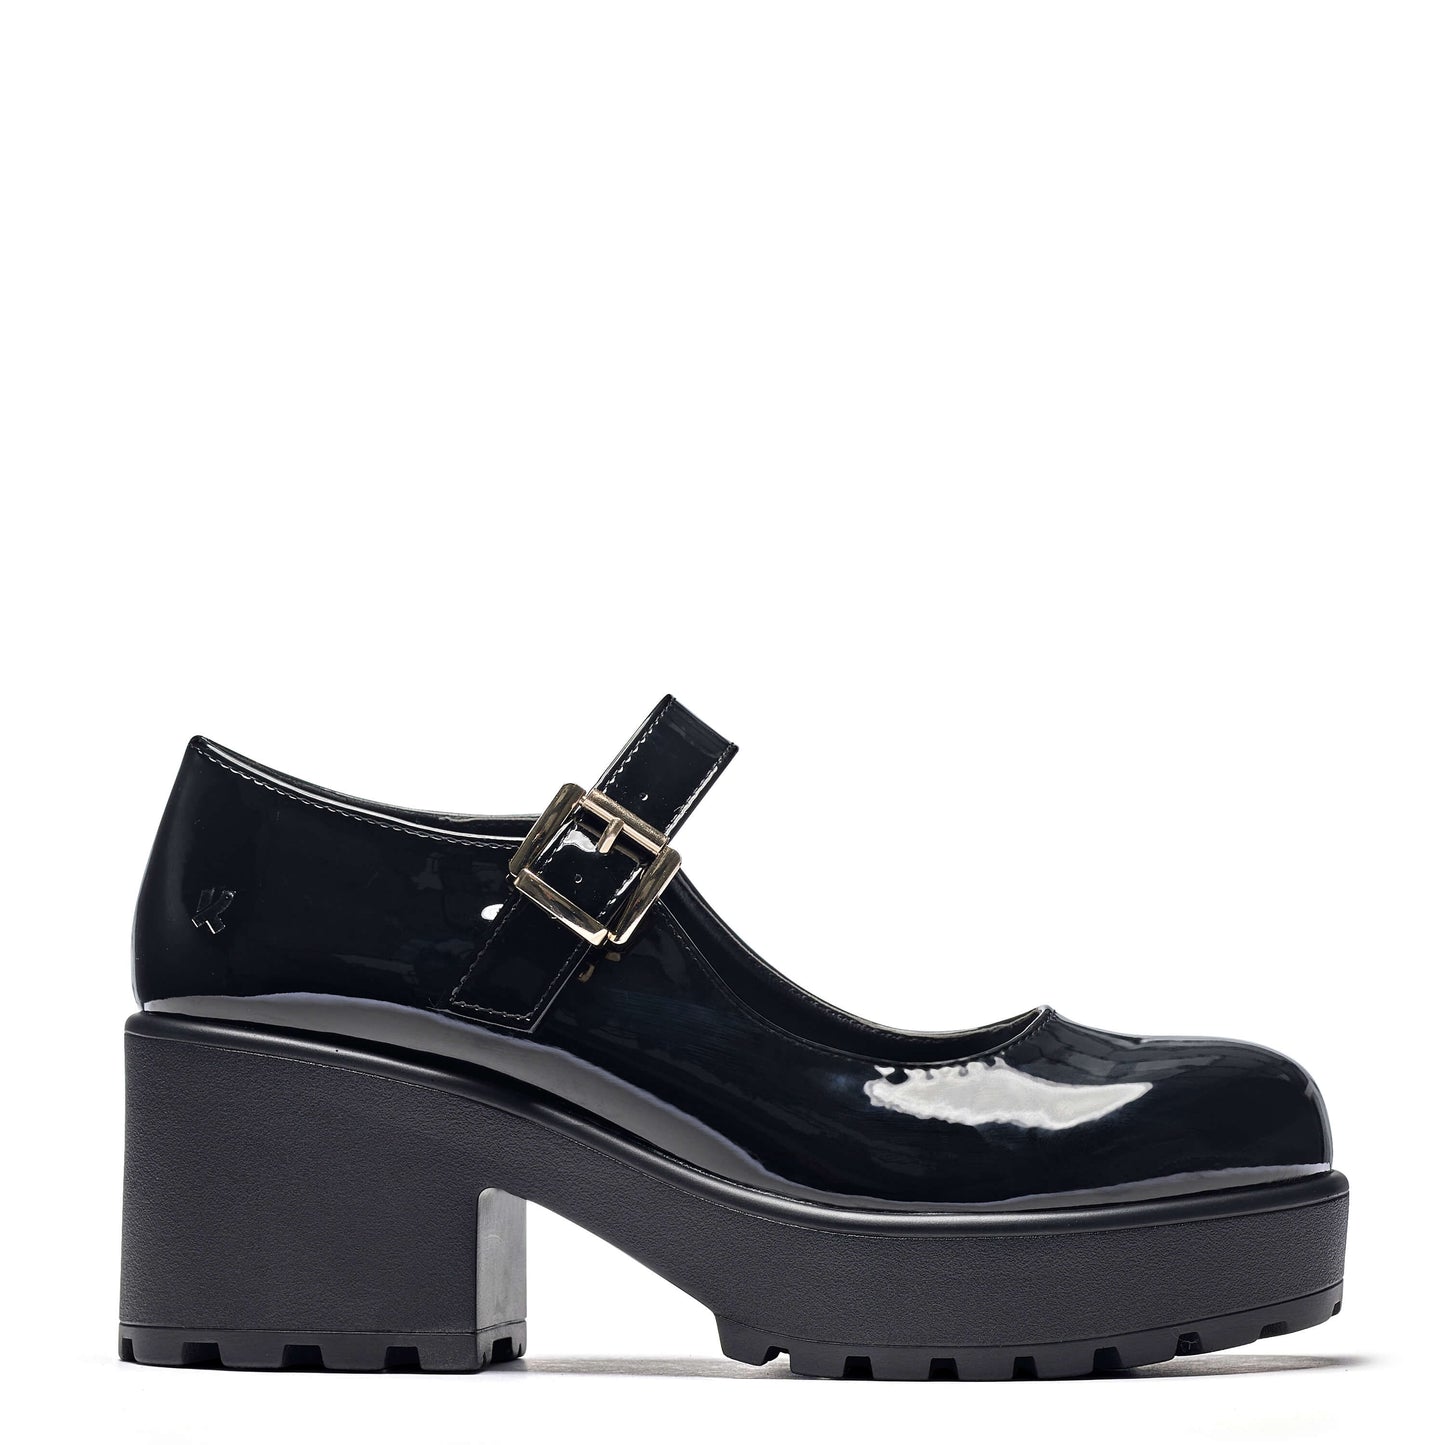 TIRA Black Mary Jane Shoes 'Patent Edition' - Mary Janes - KOI Footwear - Black Patent - Main View